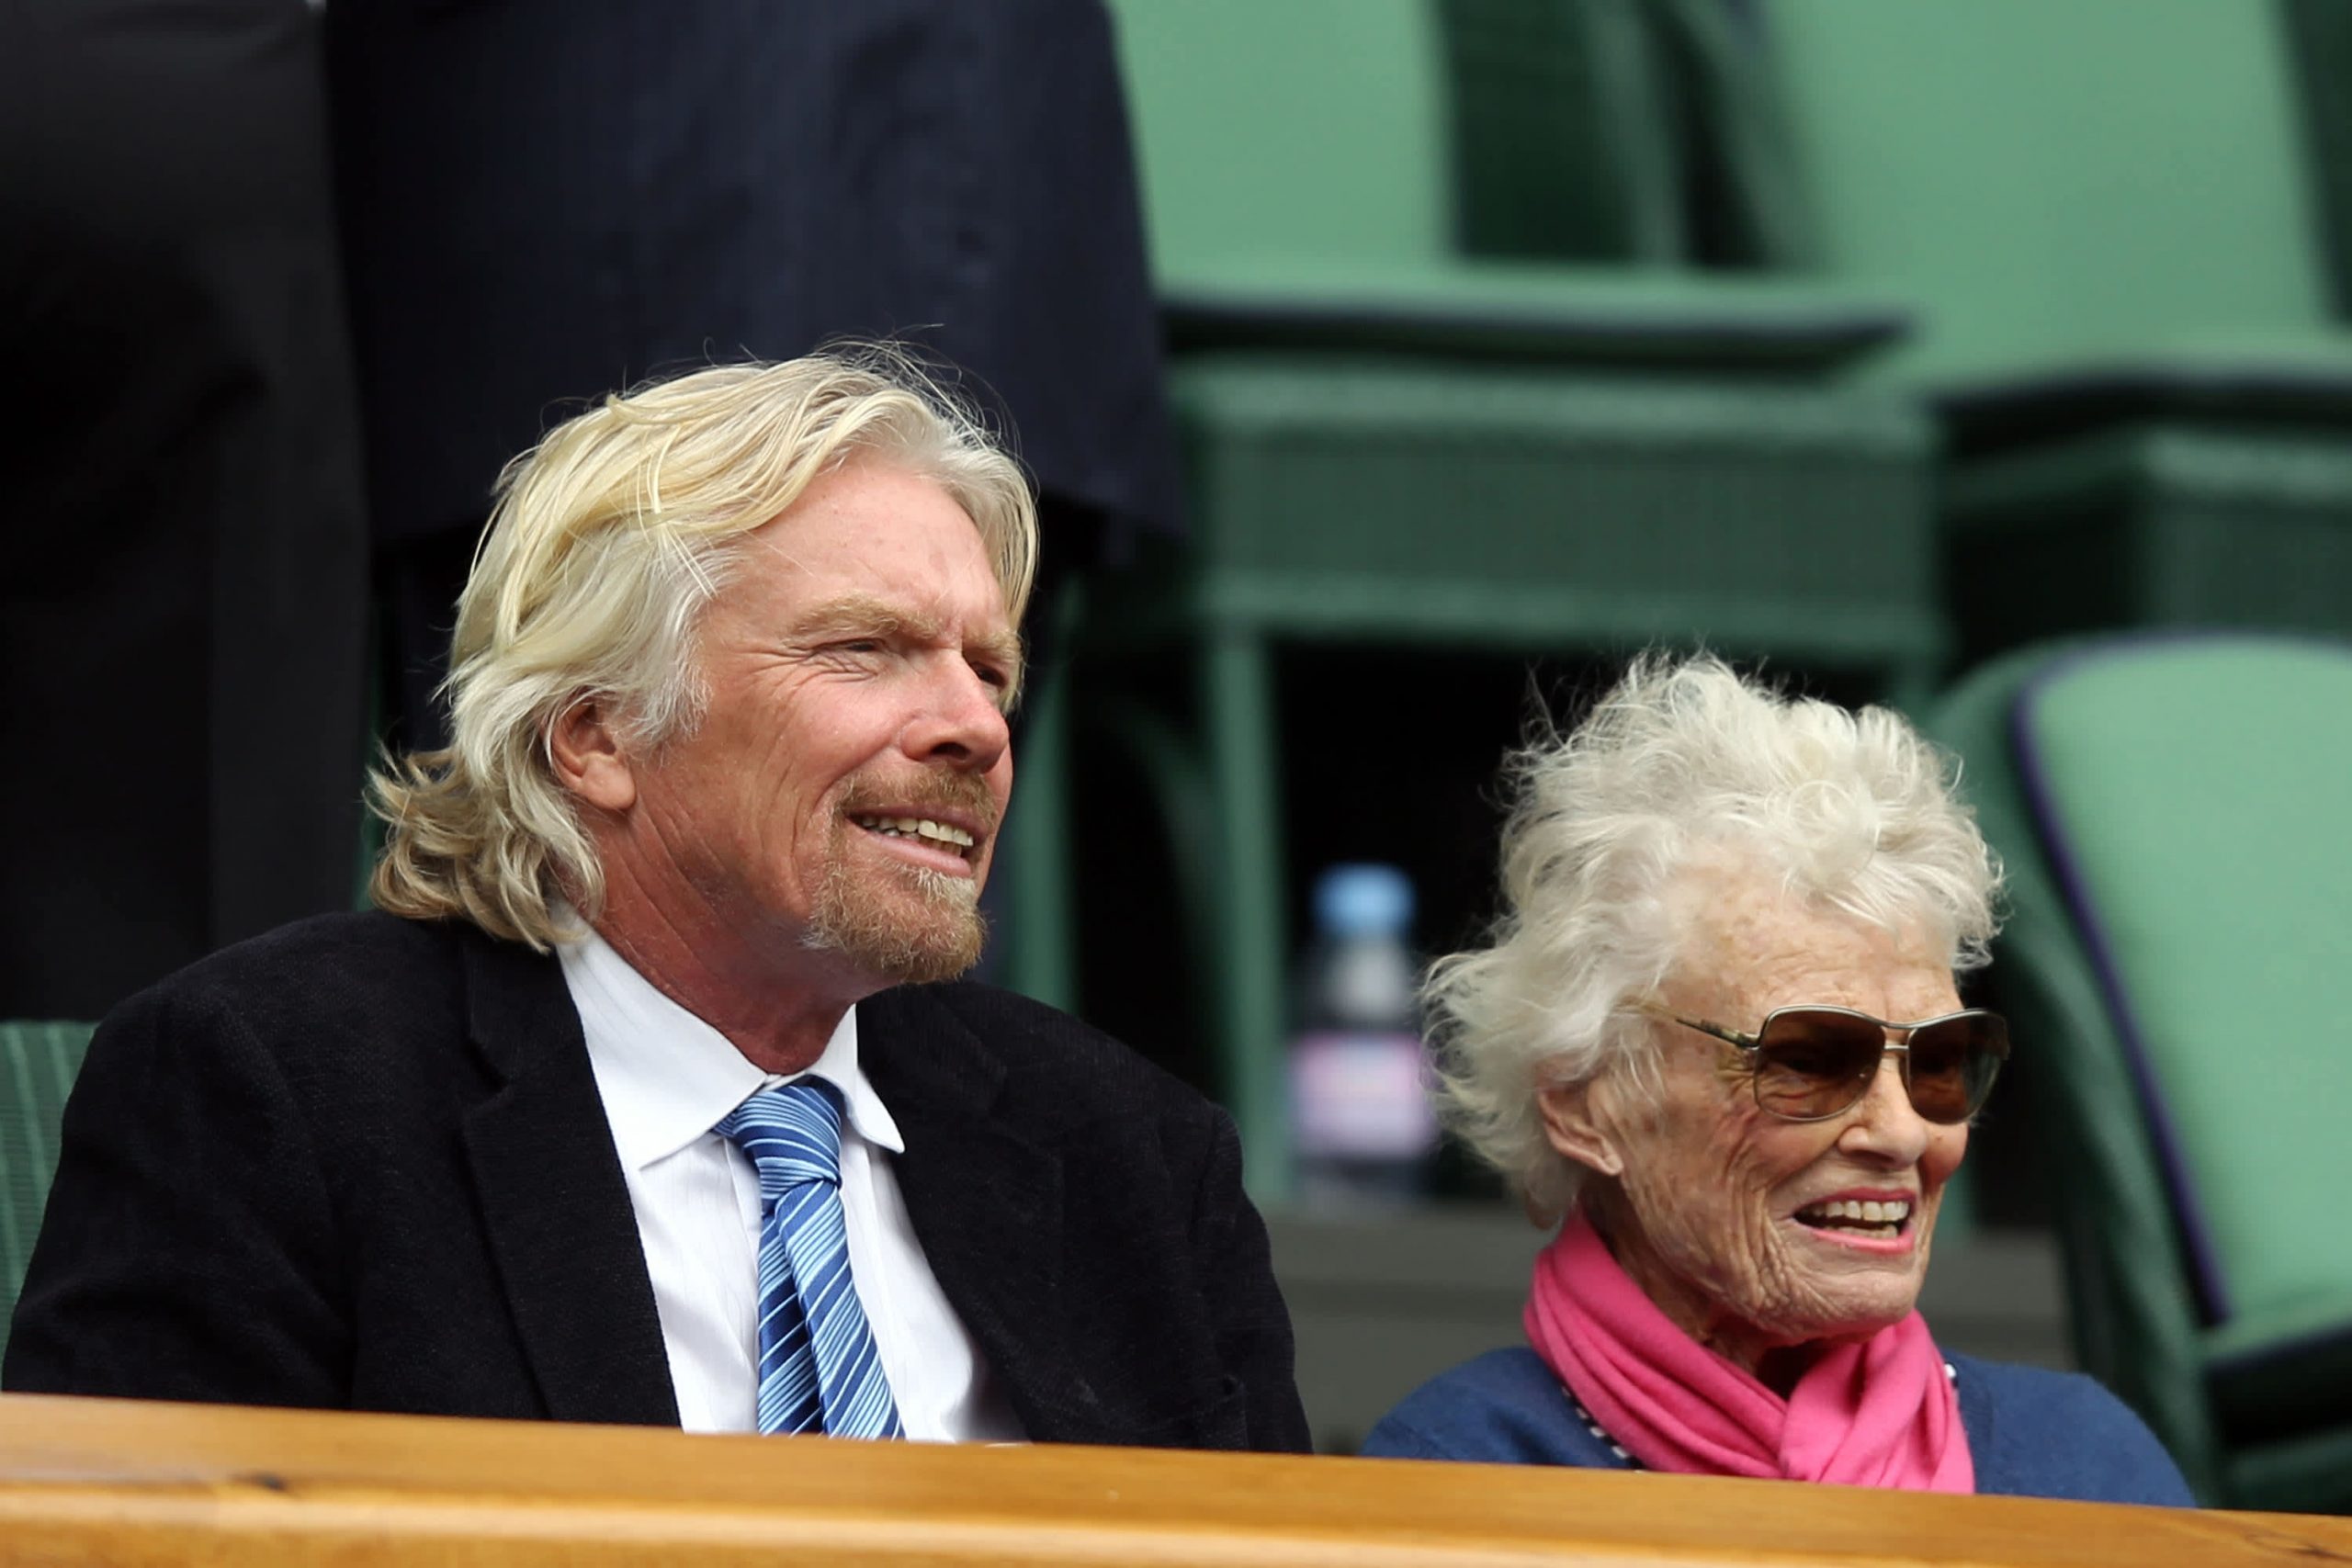 Richard Branson reveals that his mother died of Covid